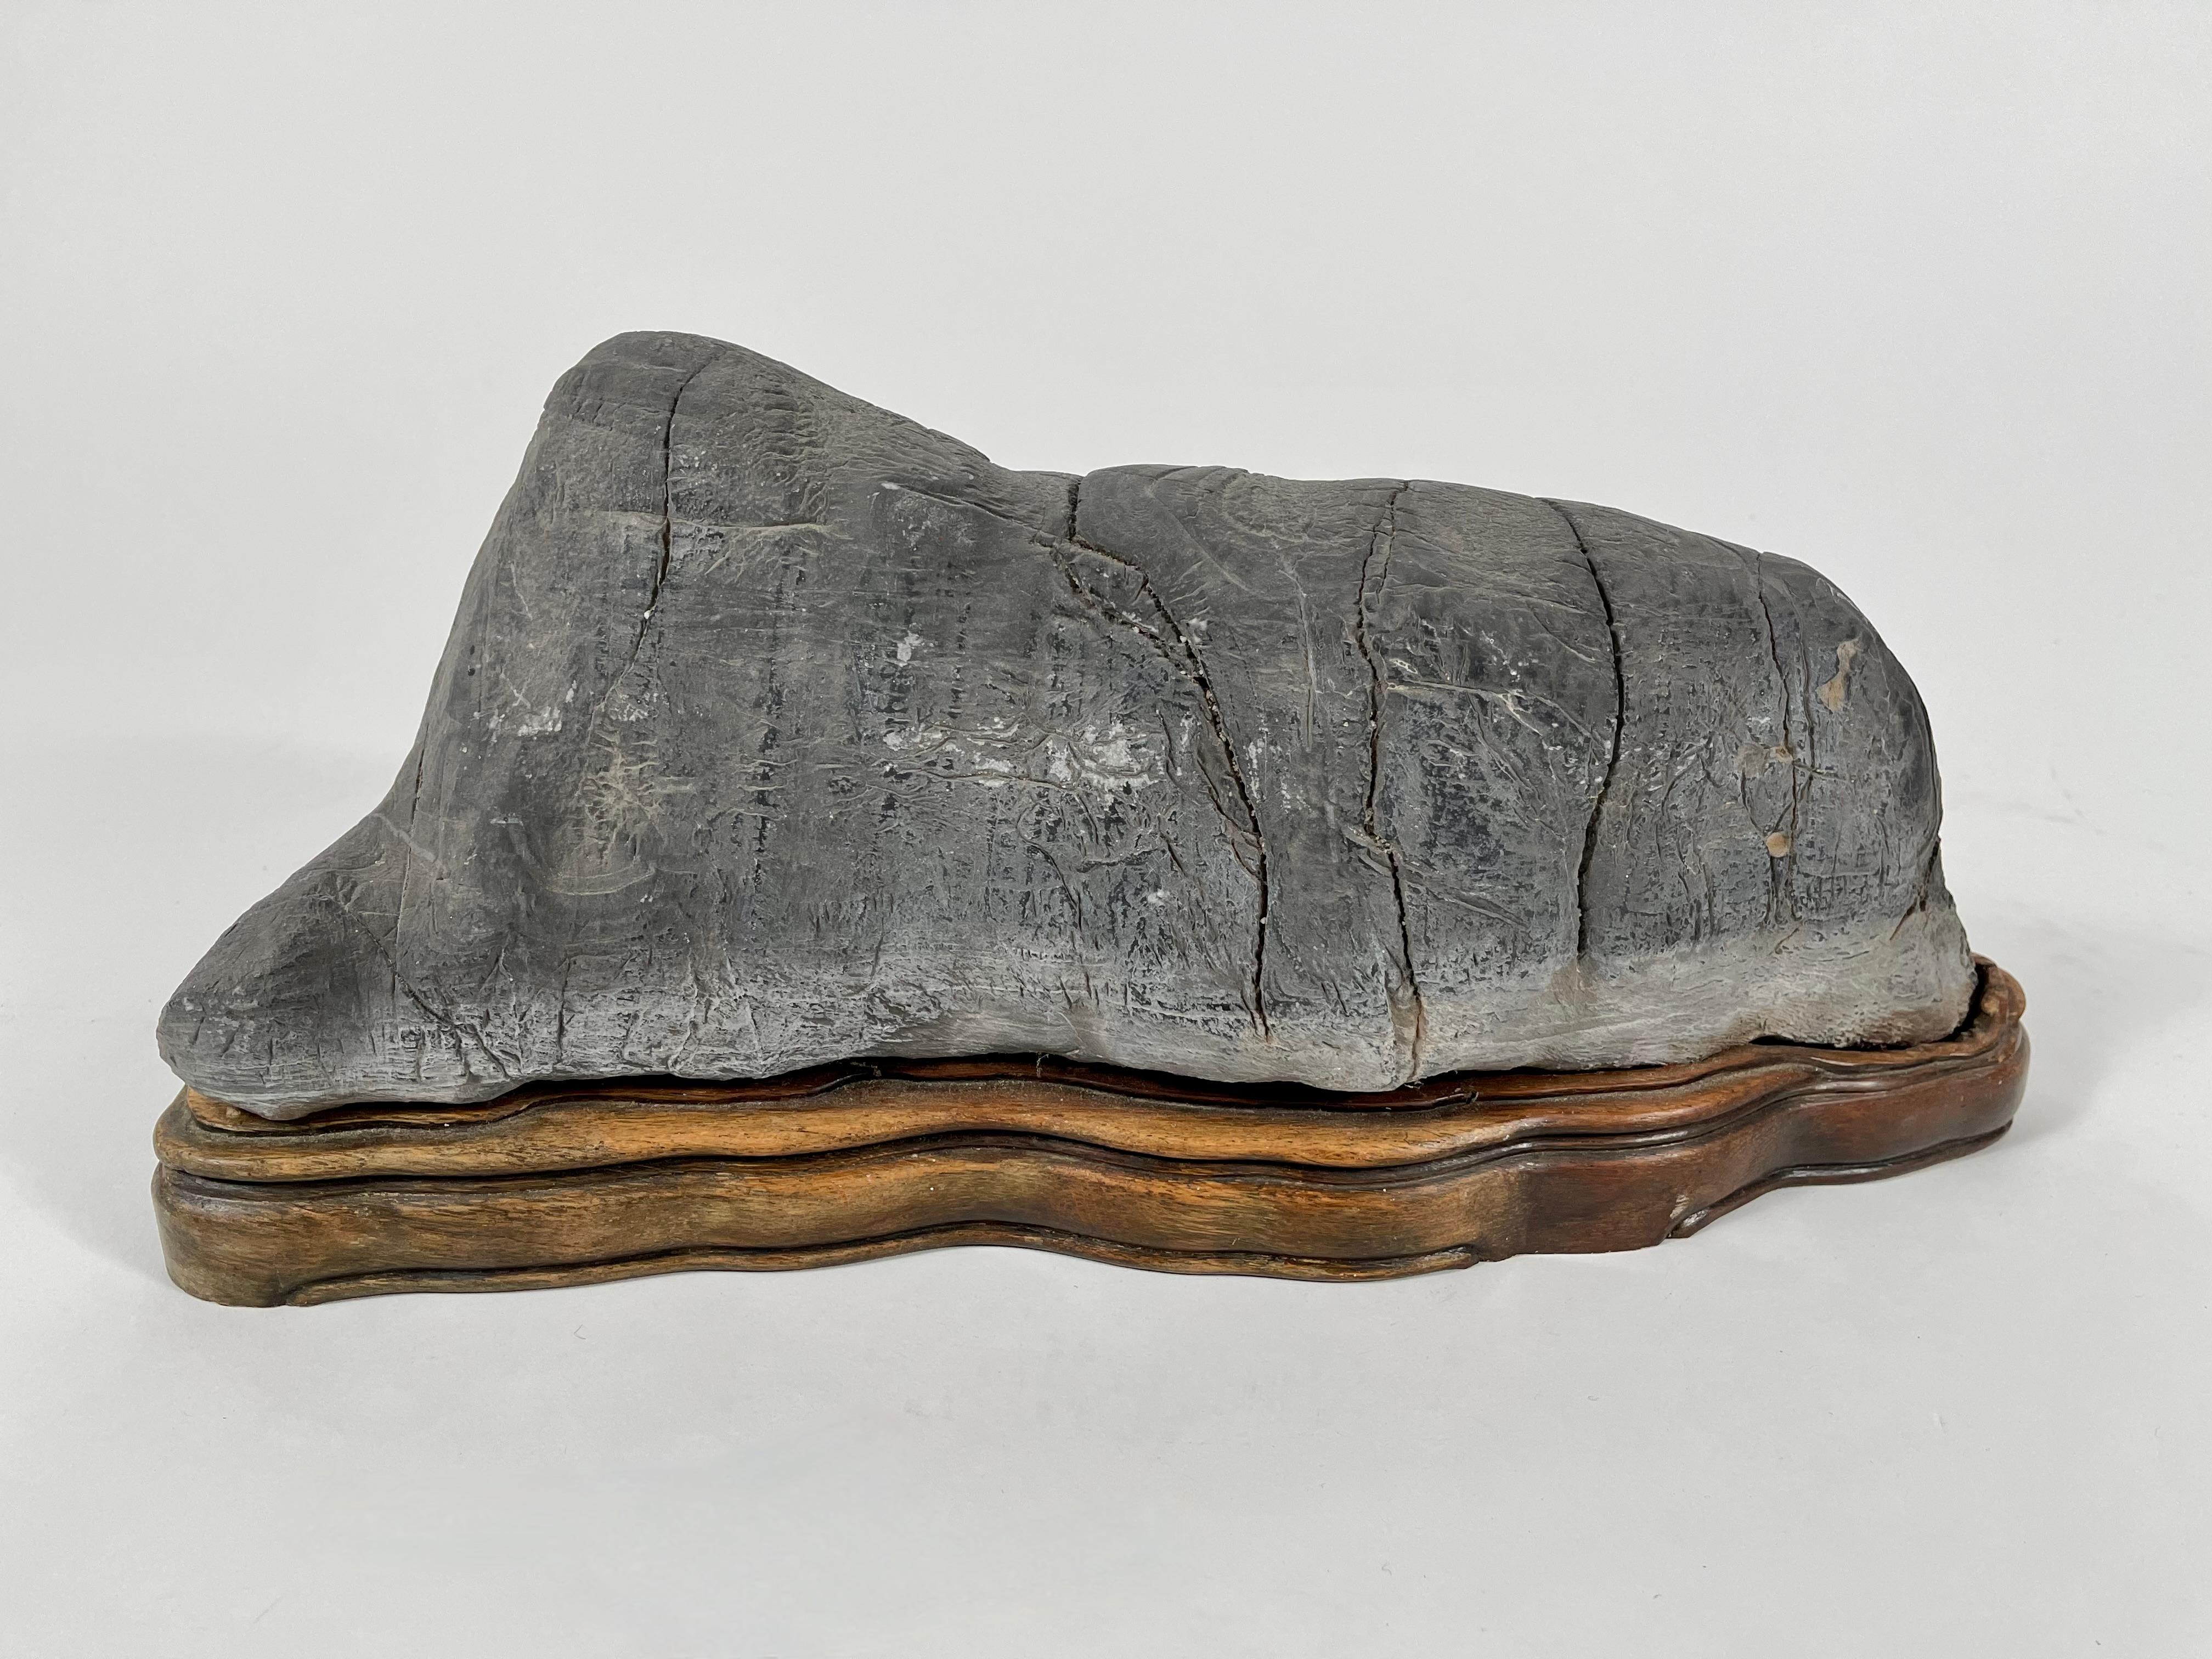 Carved Chinese or Japanese Scholar's Rock Mountain Range